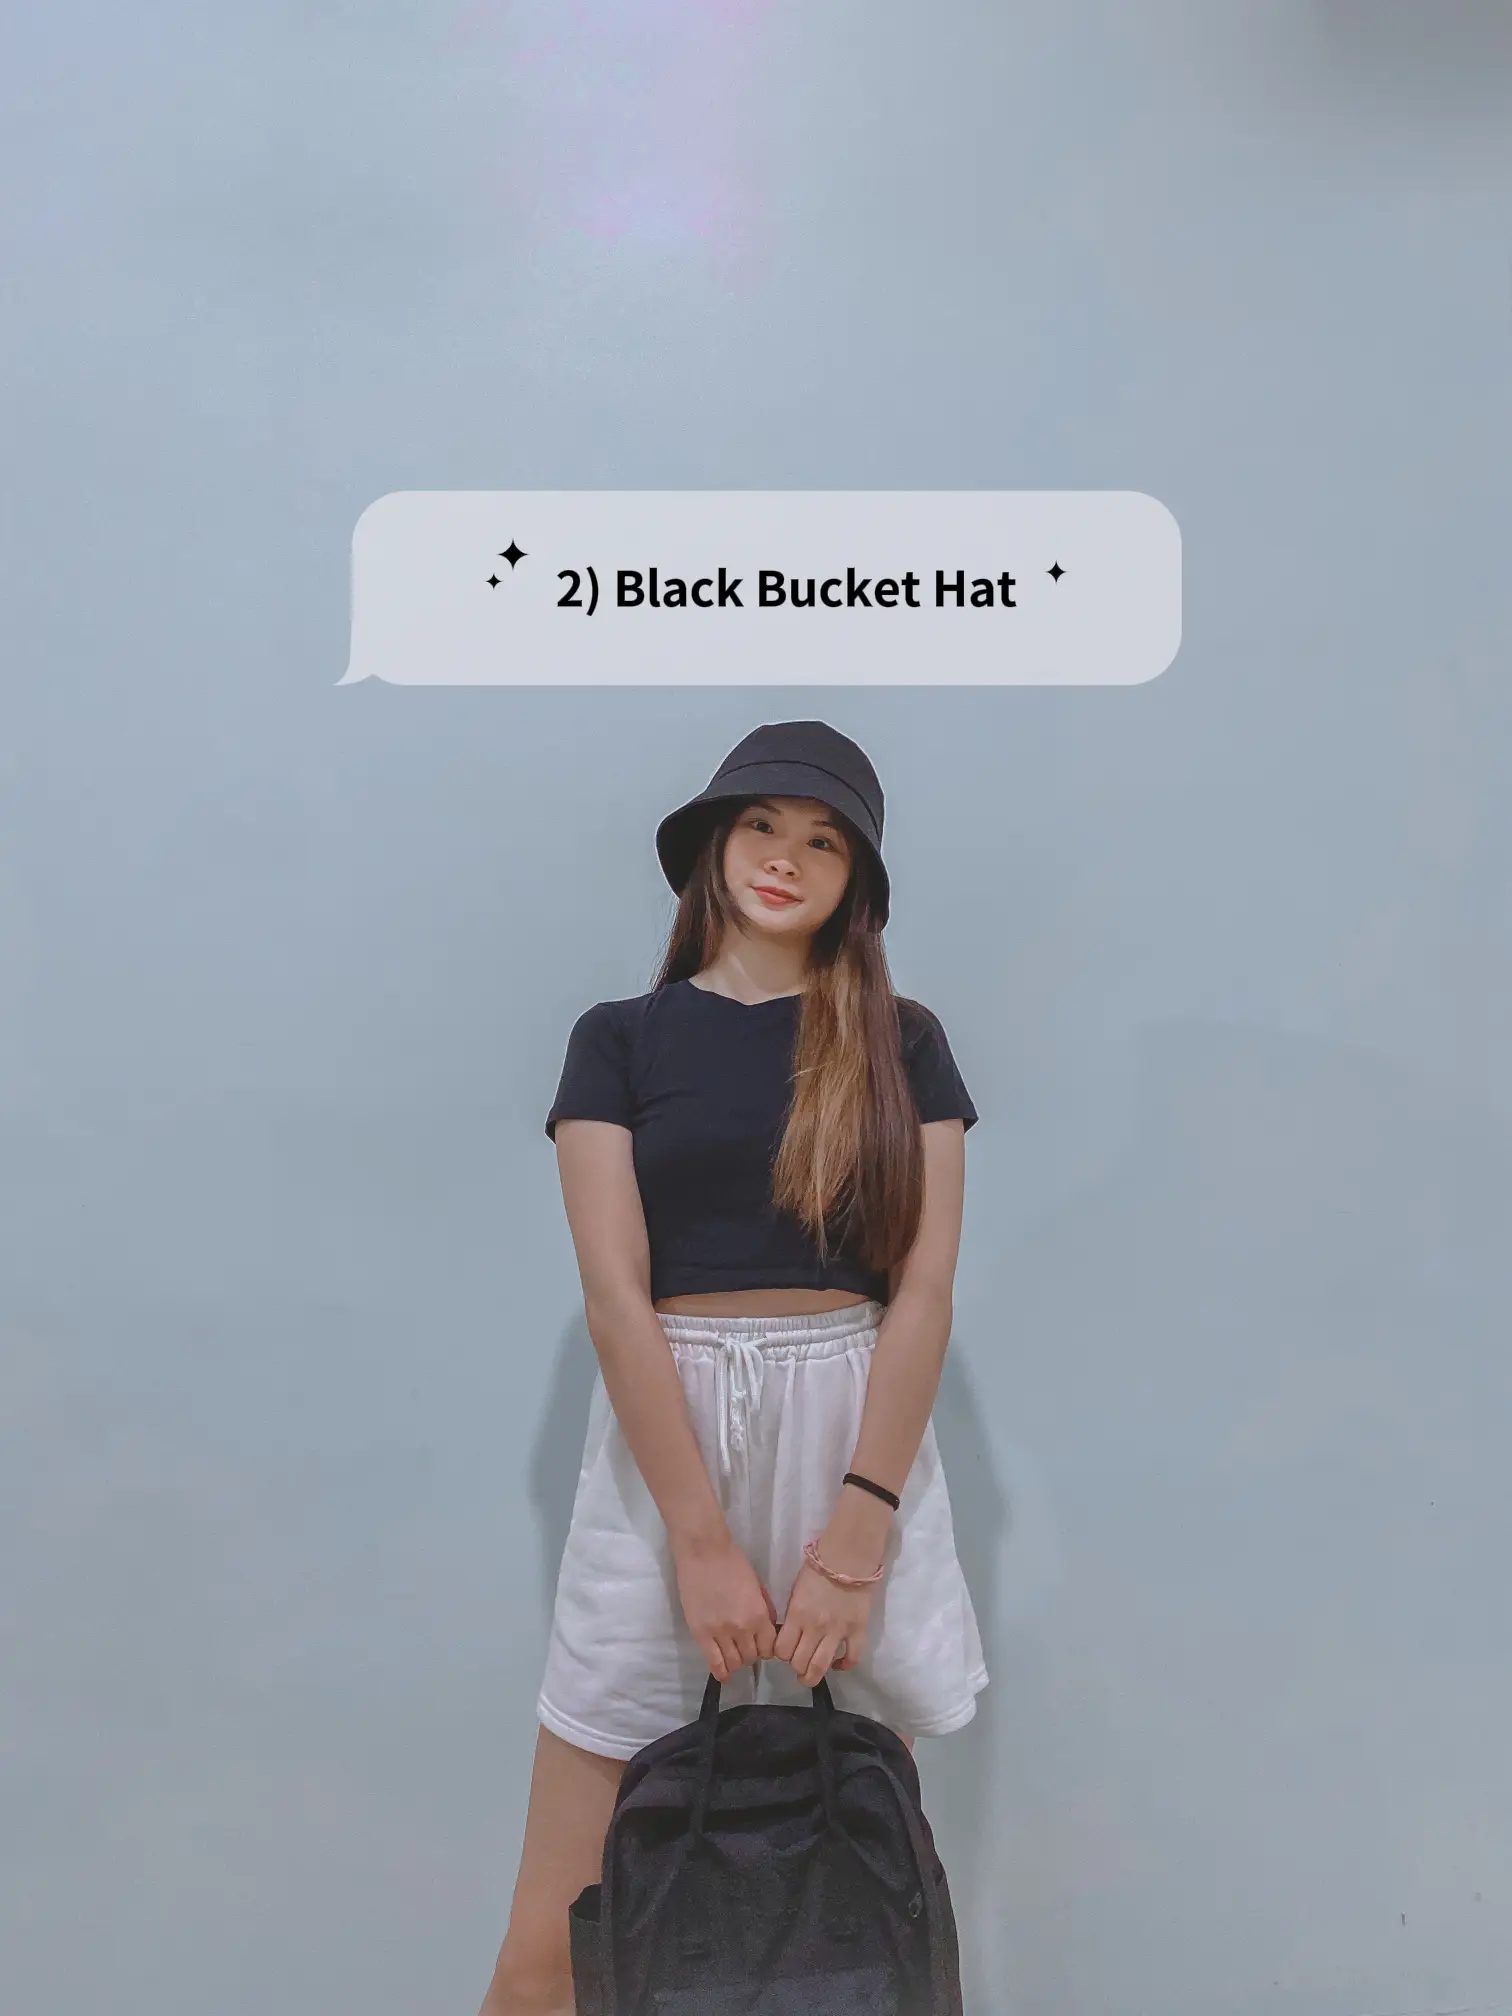 Outfits with bucket hats, yay or nay? 🤠🪖